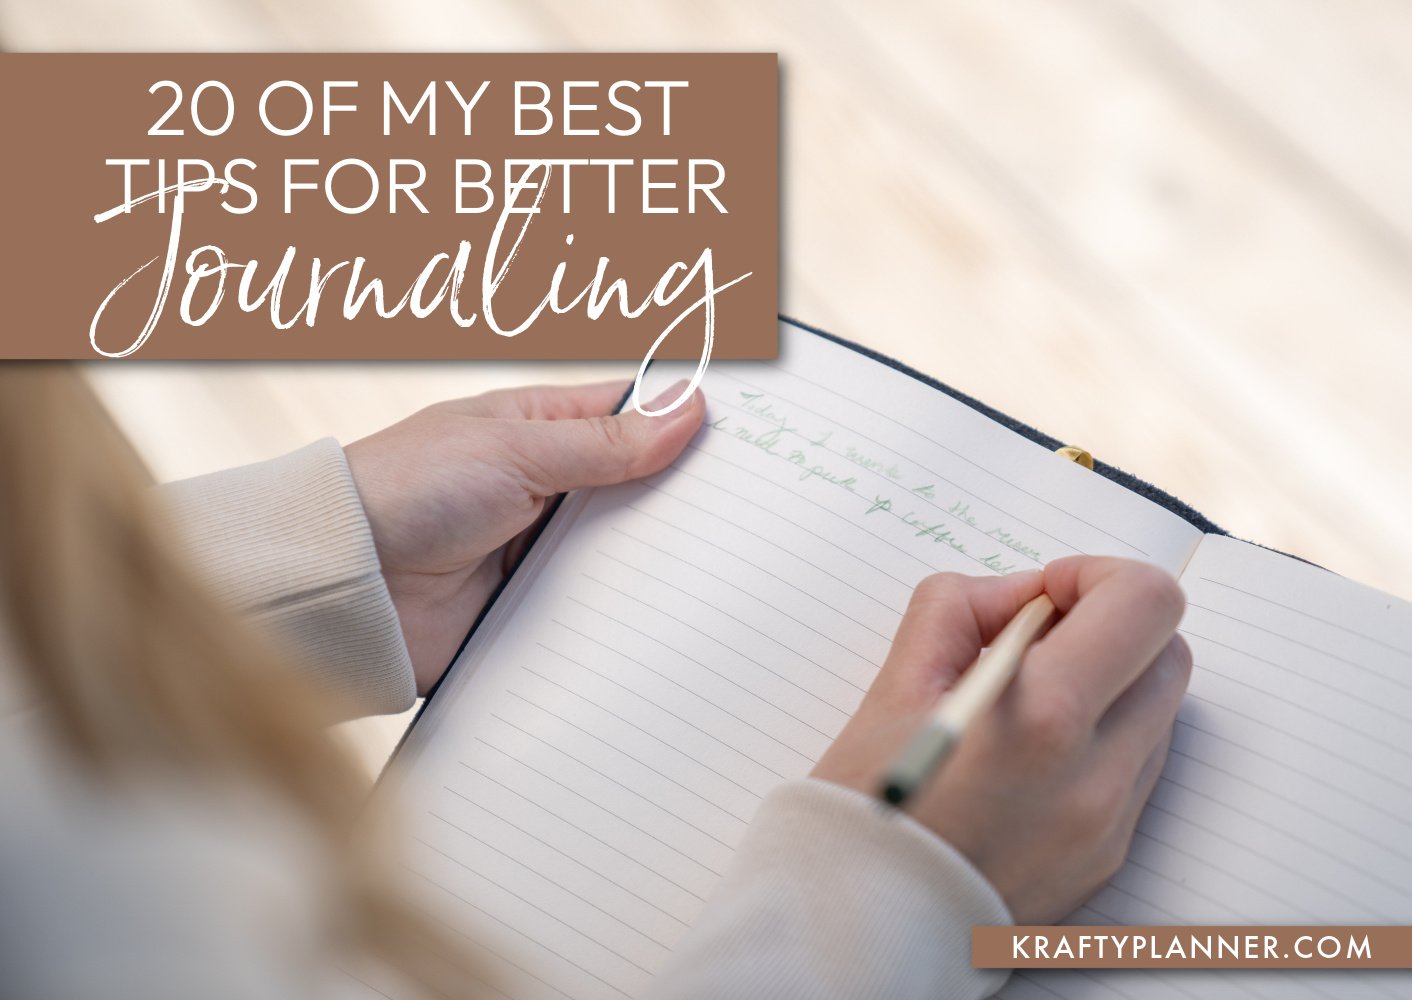 20 of My Best Tips For Better Journaling